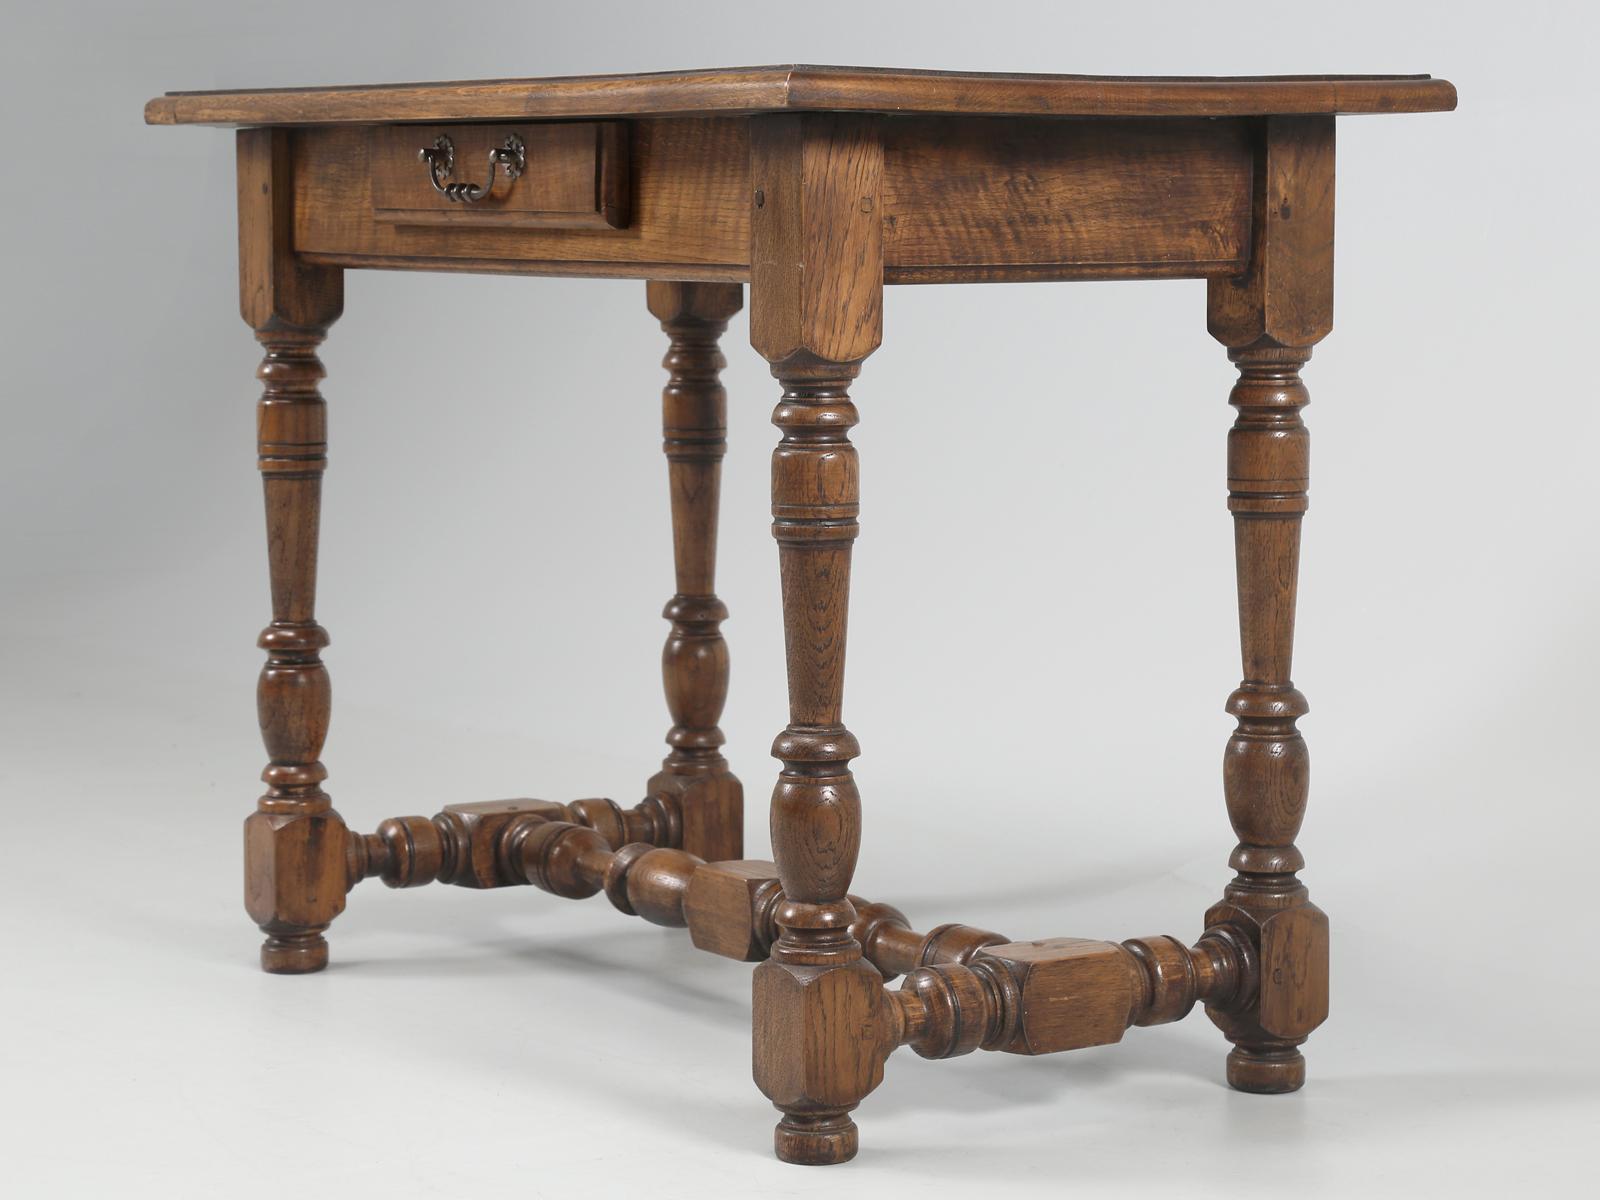 Antique French oak ladies writing table or desk. Also, works as an end table or side table. Our in house restoration department restored the finish back to its original French walnut color, although the antique table is constructed from white oak.